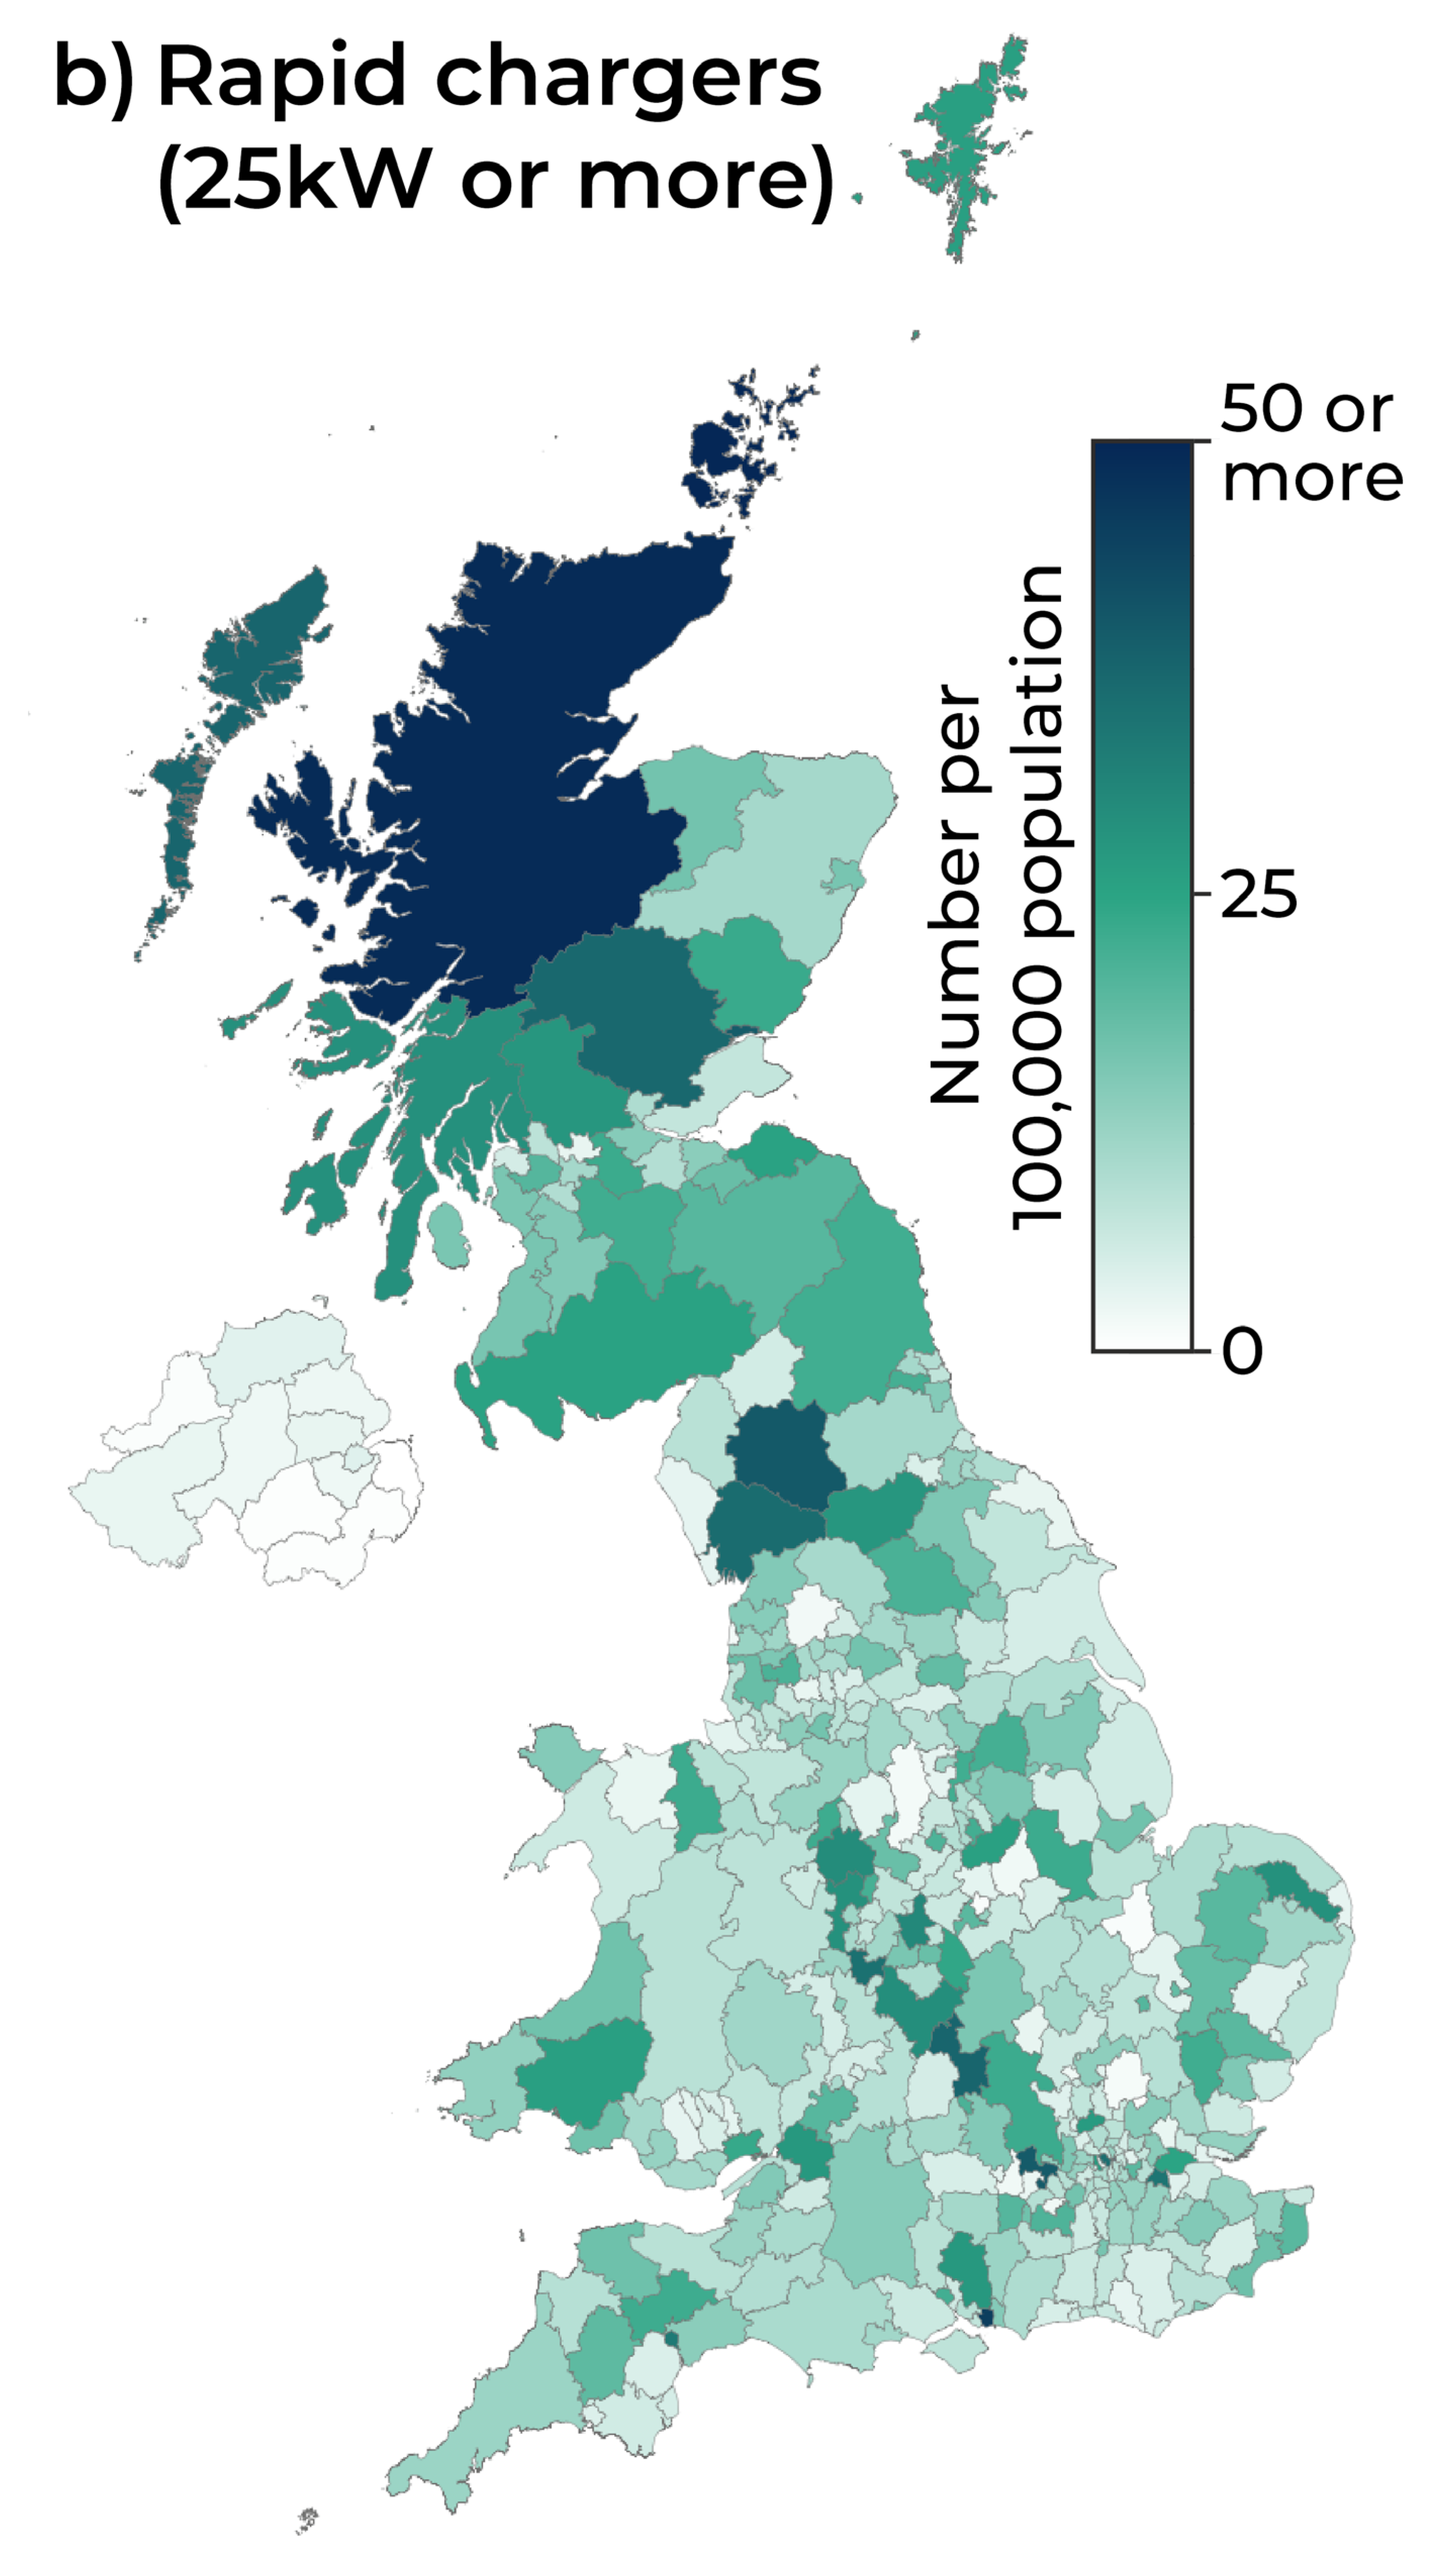 Map showing the number rapid chargers (25 kW or more) per 100,000 population across local authorities in the UK. Wales has a lower density of rapid chargers than the rest of Great Britain.